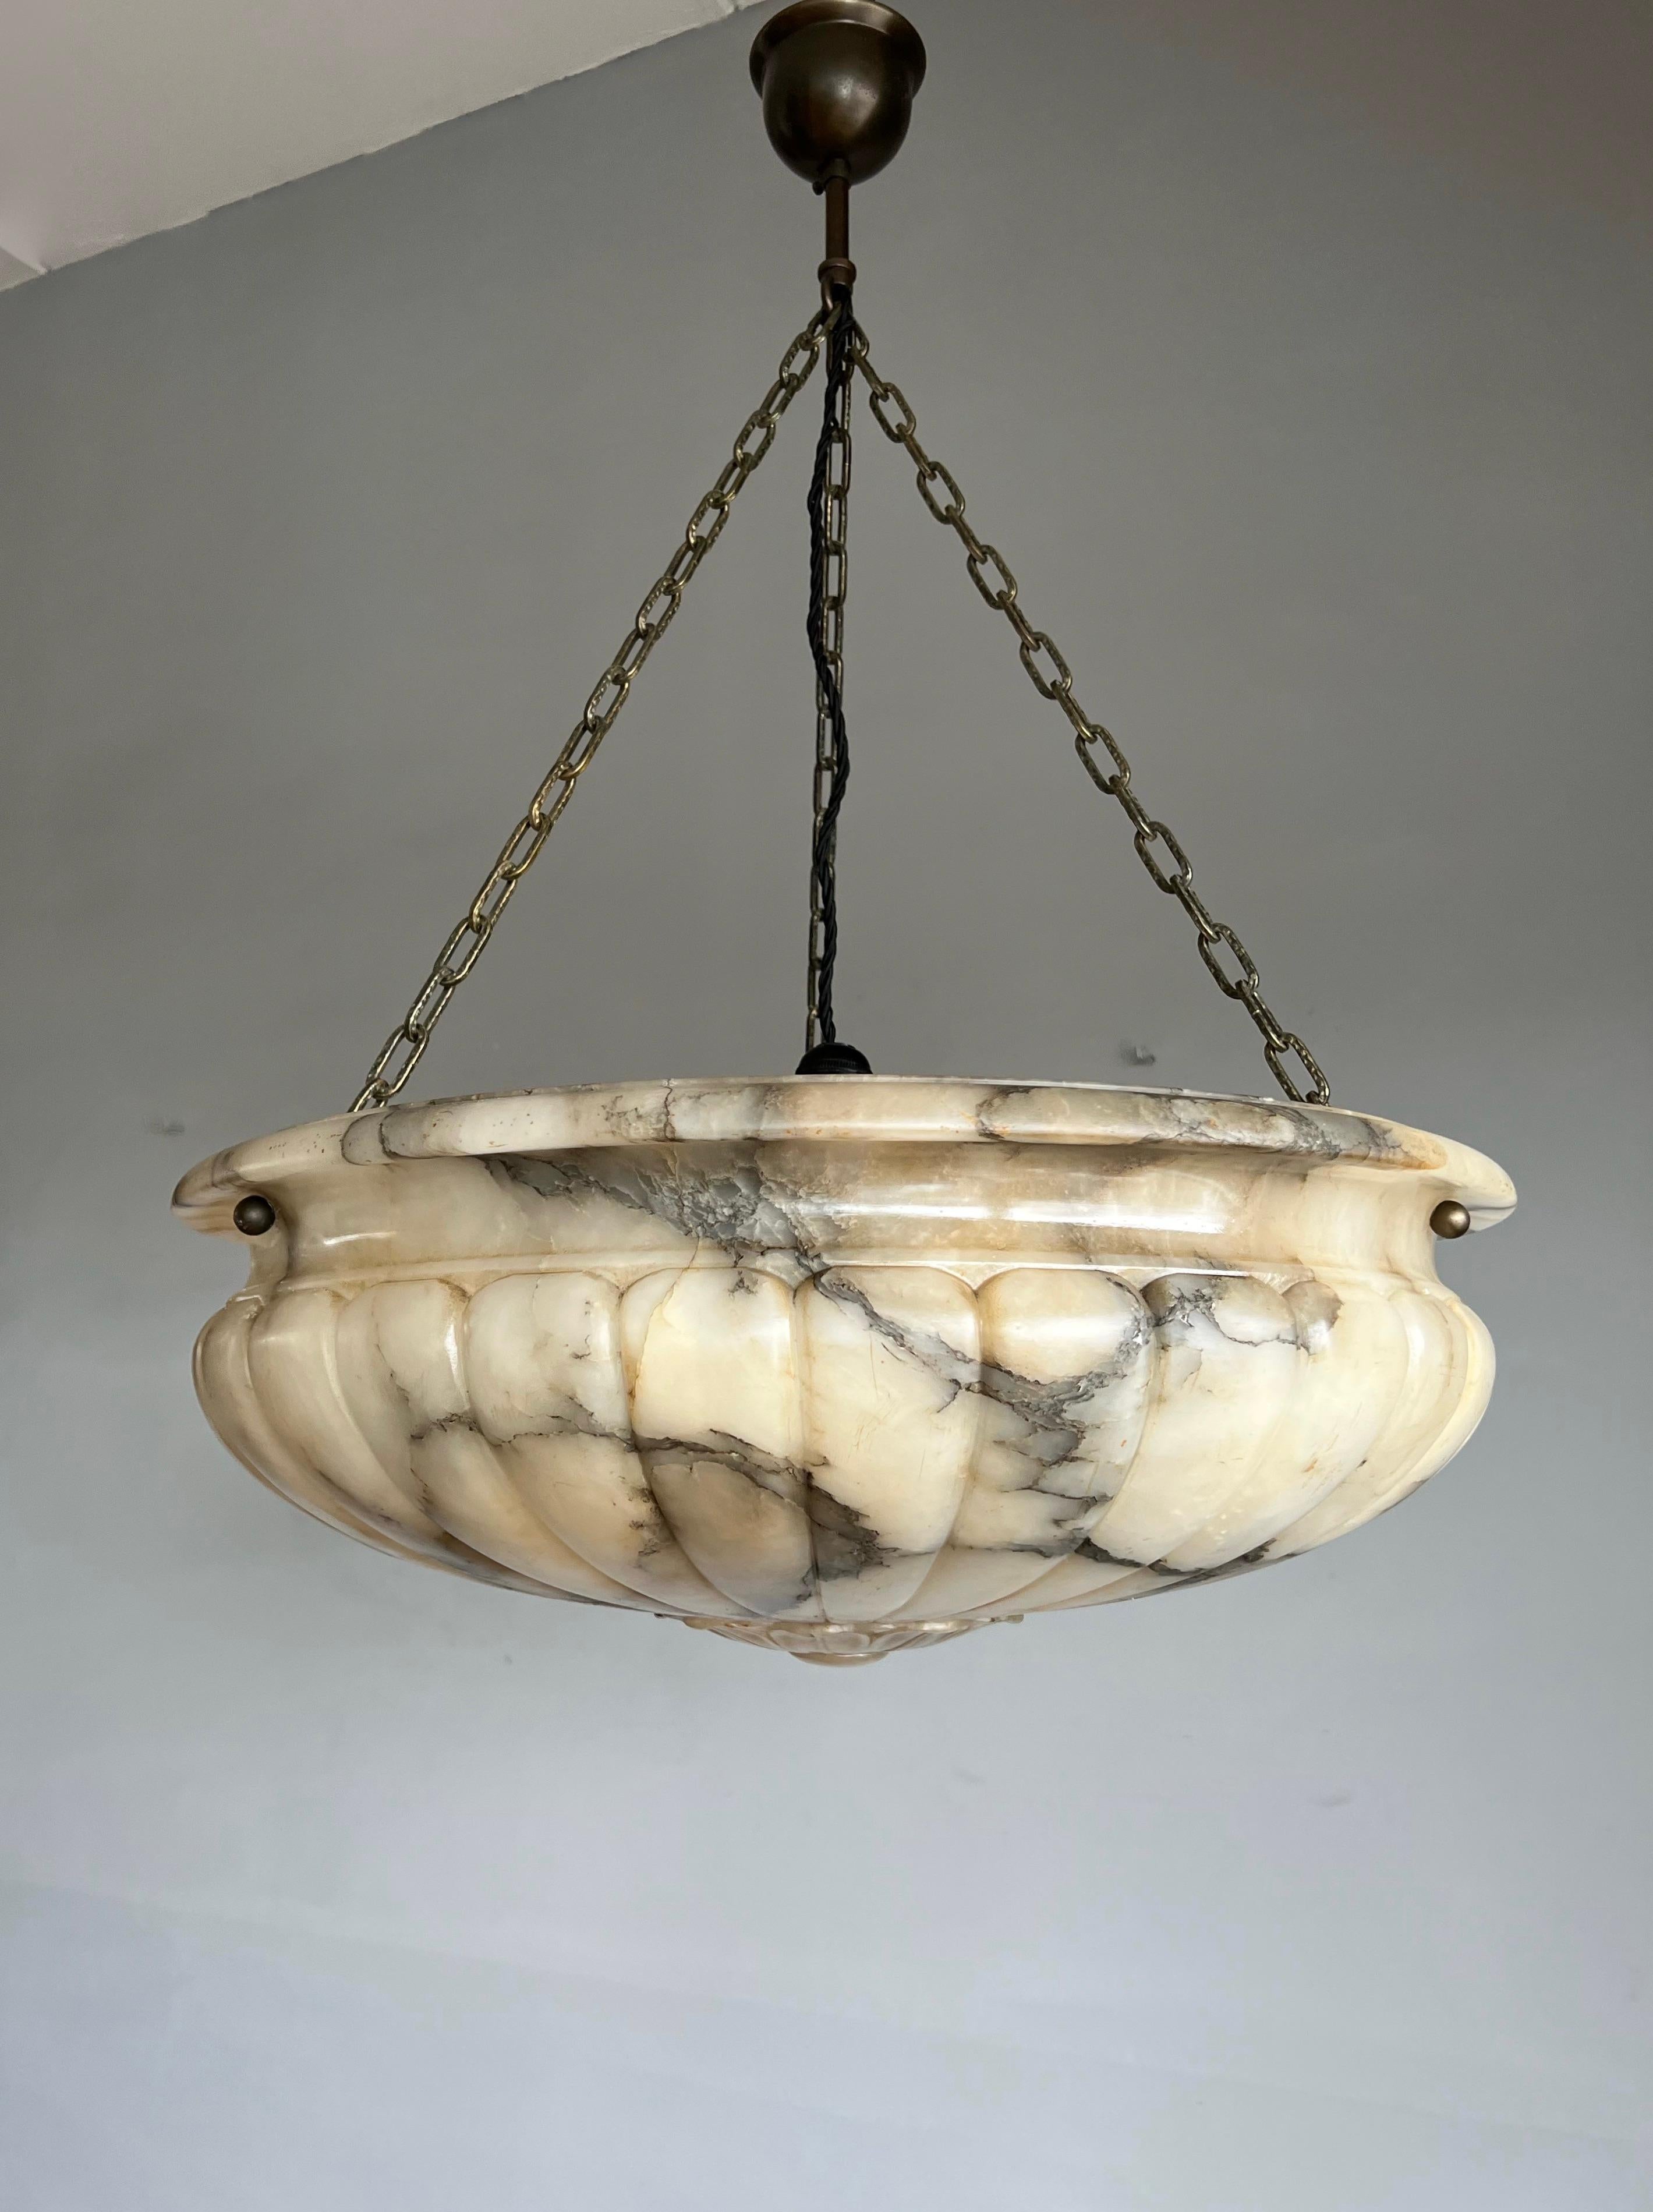 Large size and great design, hand carved, antique alabaster chandelier.

Thanks to its very large size & deep shape this remarkable alabaster chandelier will light up both your days and evenings. The profesionally restored shade is again in the